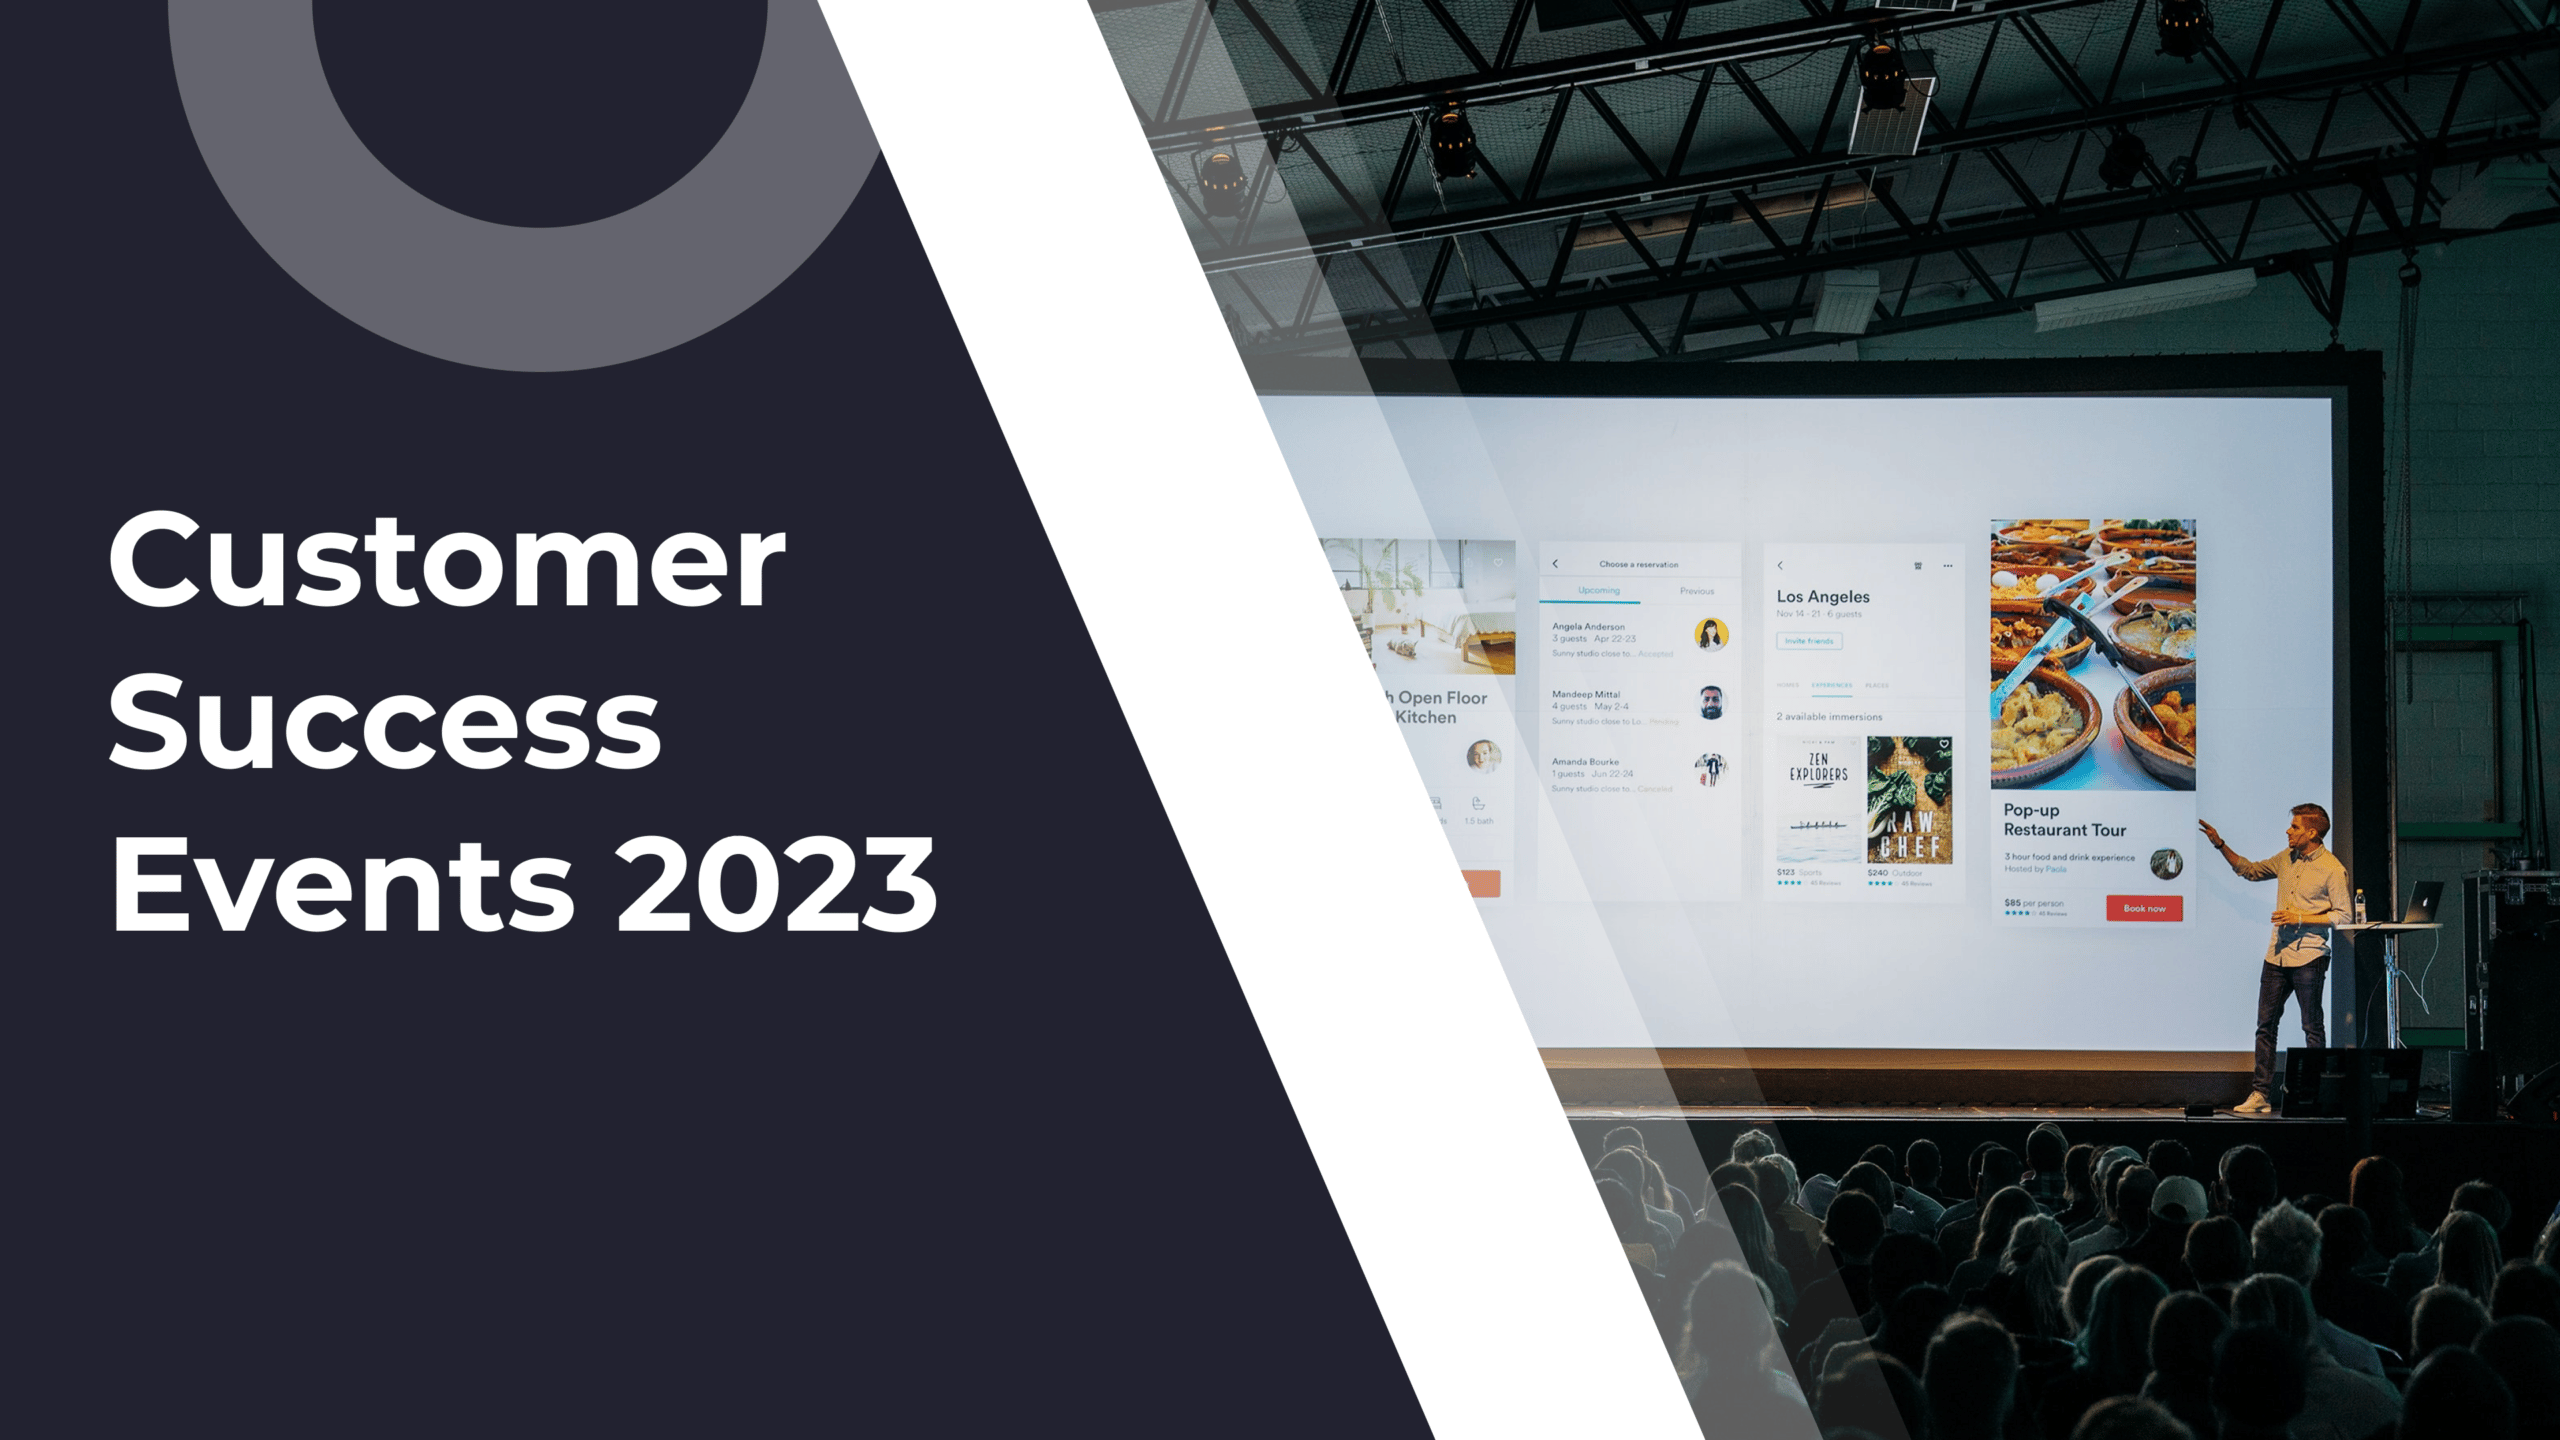 Customer success events and conferences for CS professionals in 2023